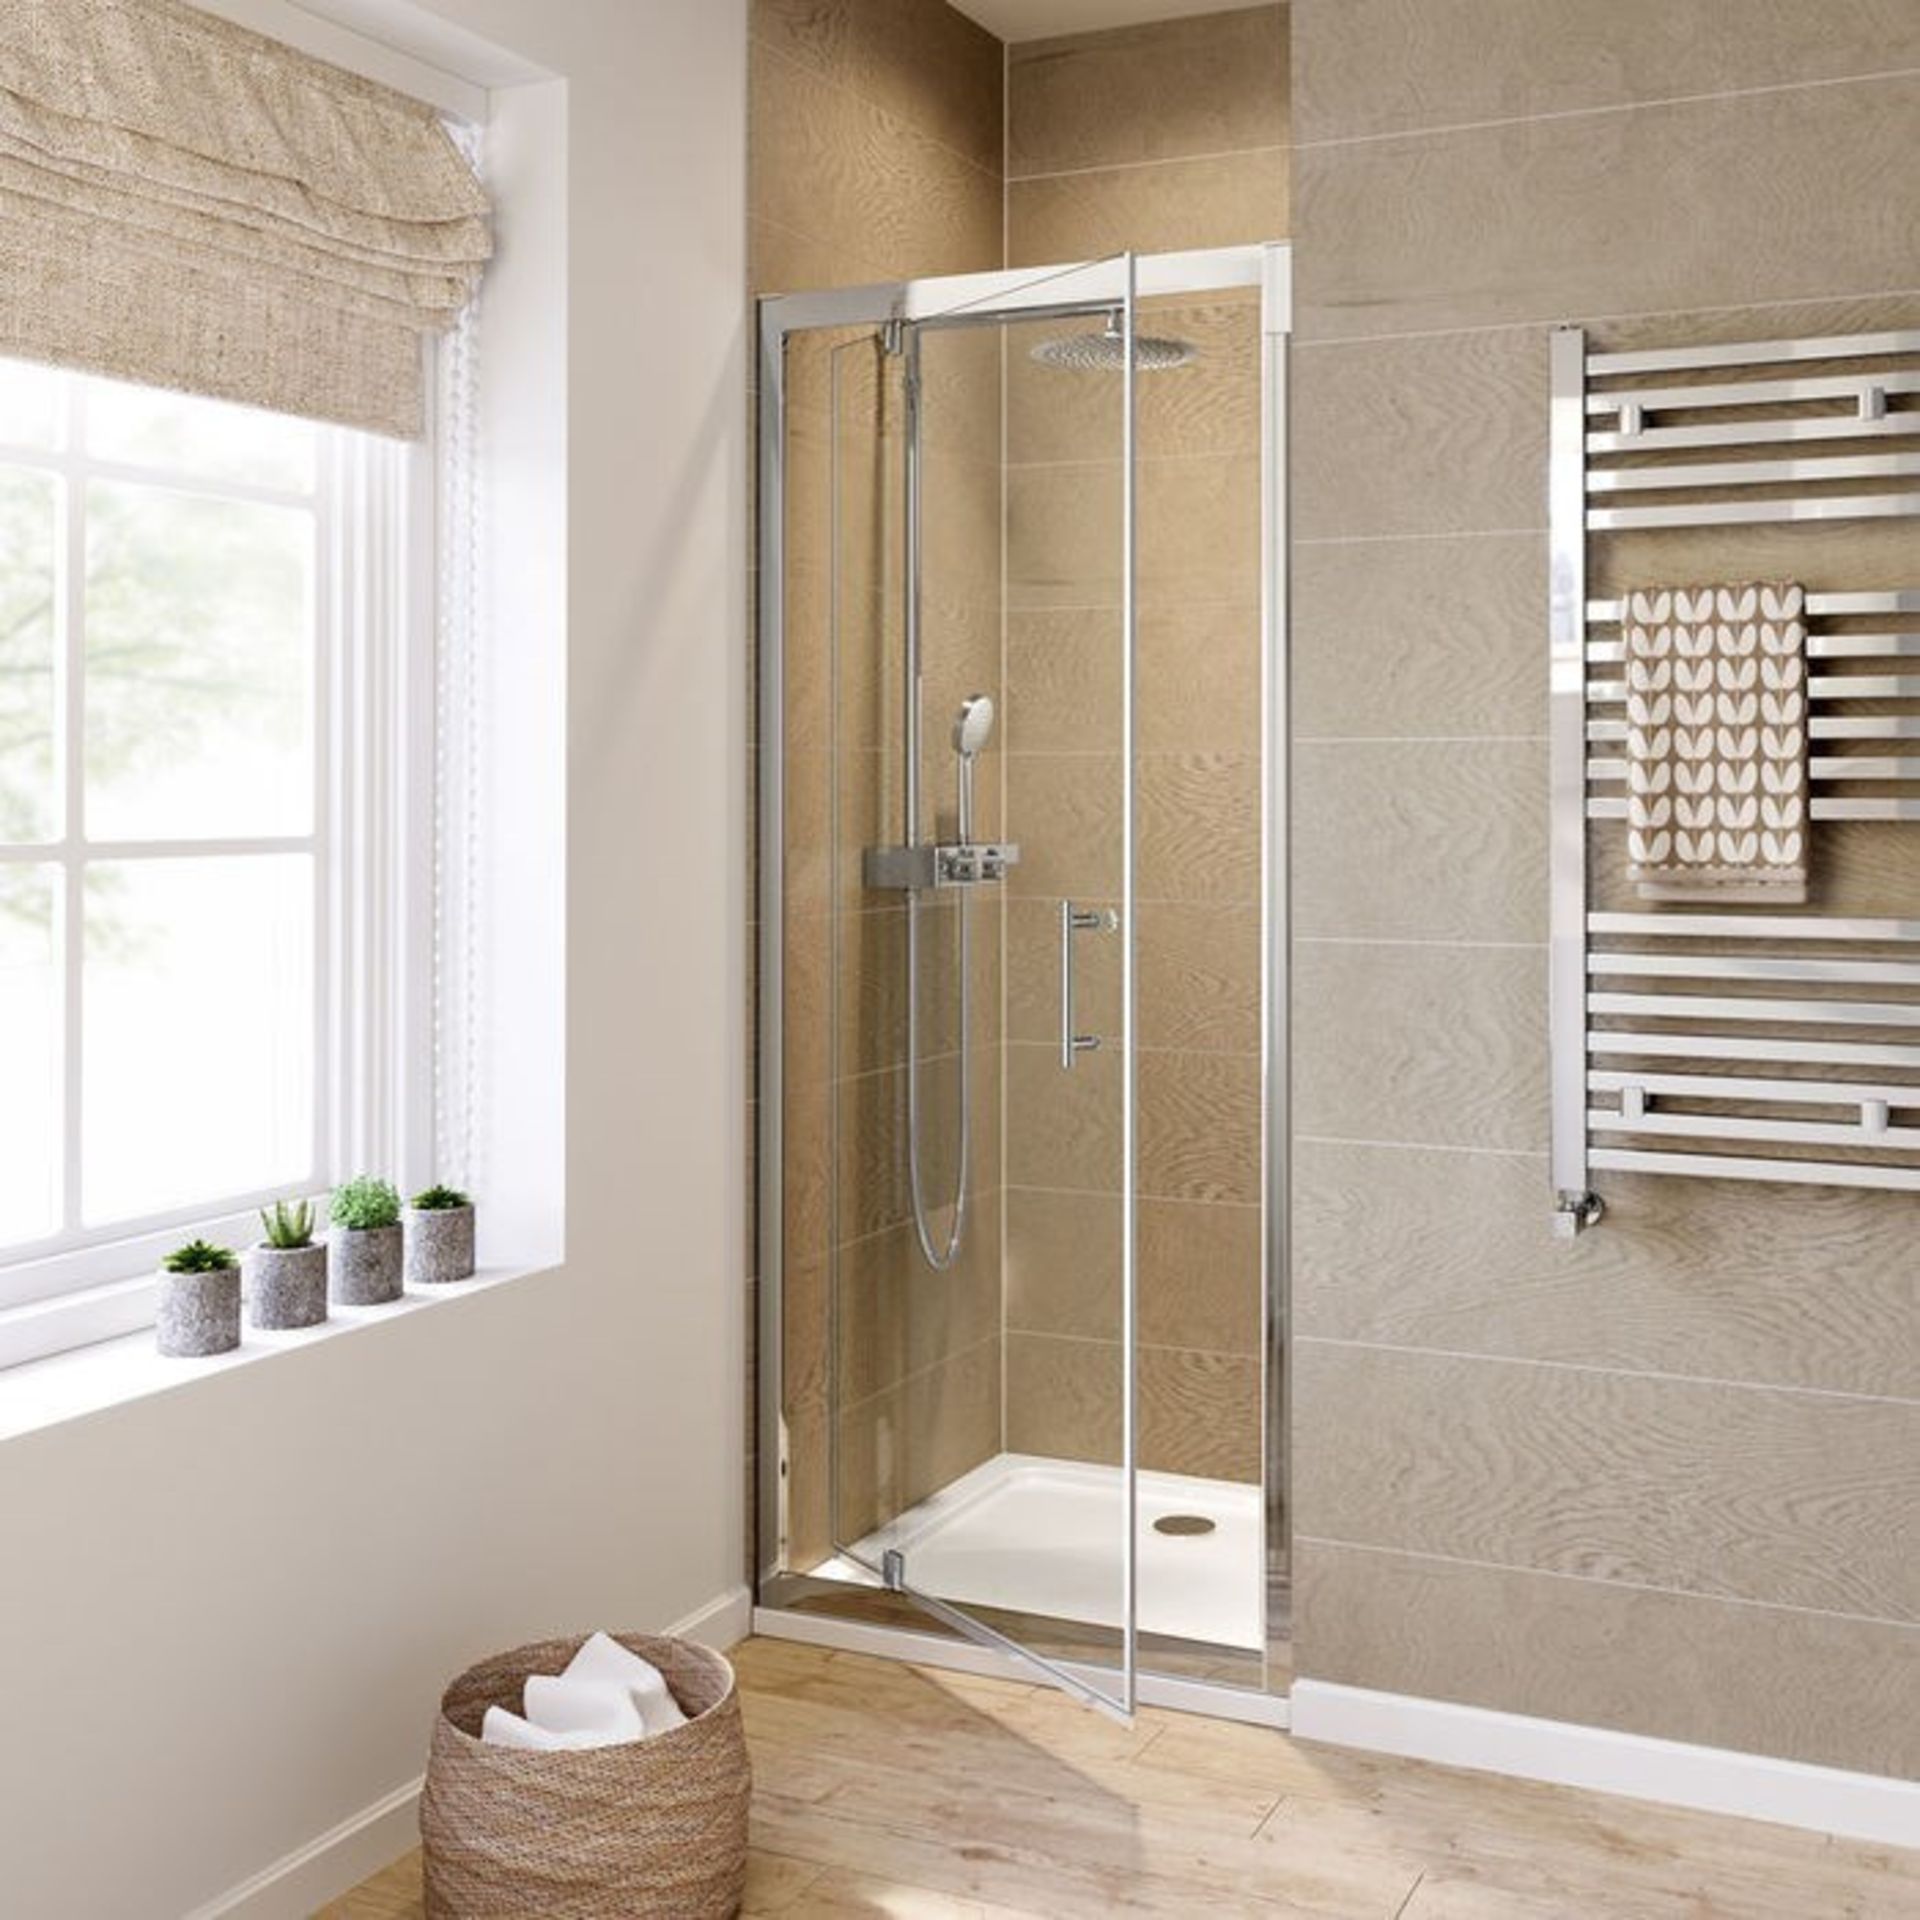 Twyfords 700mm - 6mm - Premium Pivot Shower Door. RRP £339.99.8mm Safety Glass Fully waterproo... - Image 3 of 3